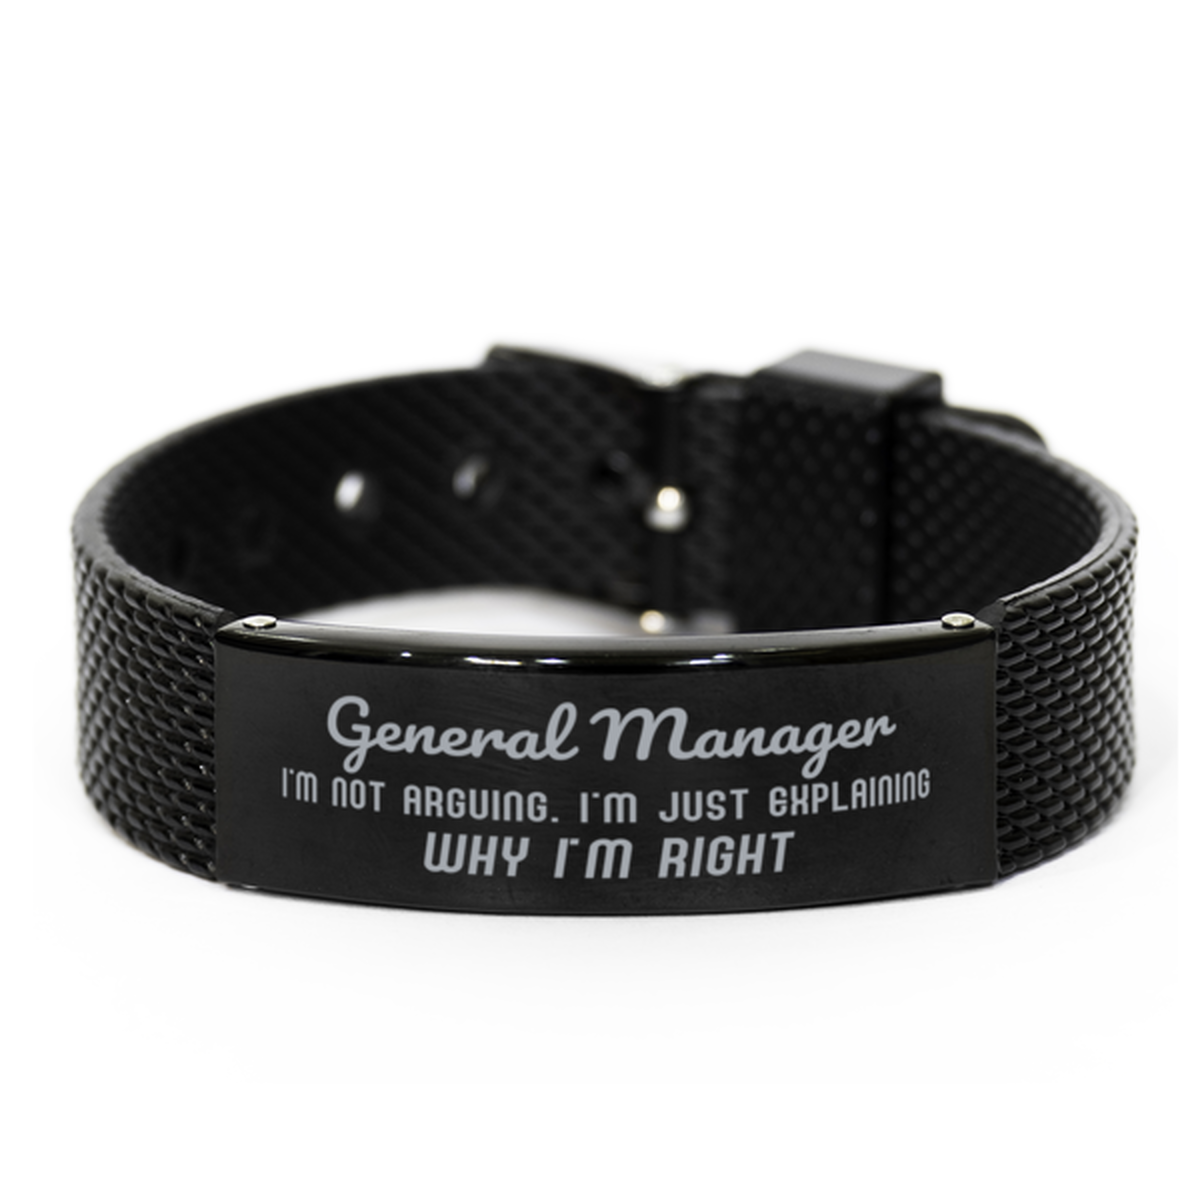 General Manager I'm not Arguing. I'm Just Explaining Why I'm RIGHT Black Shark Mesh Bracelet, Funny Saying Quote General Manager Gifts For General Manager Graduation Birthday Christmas Gifts for Men Women Coworker